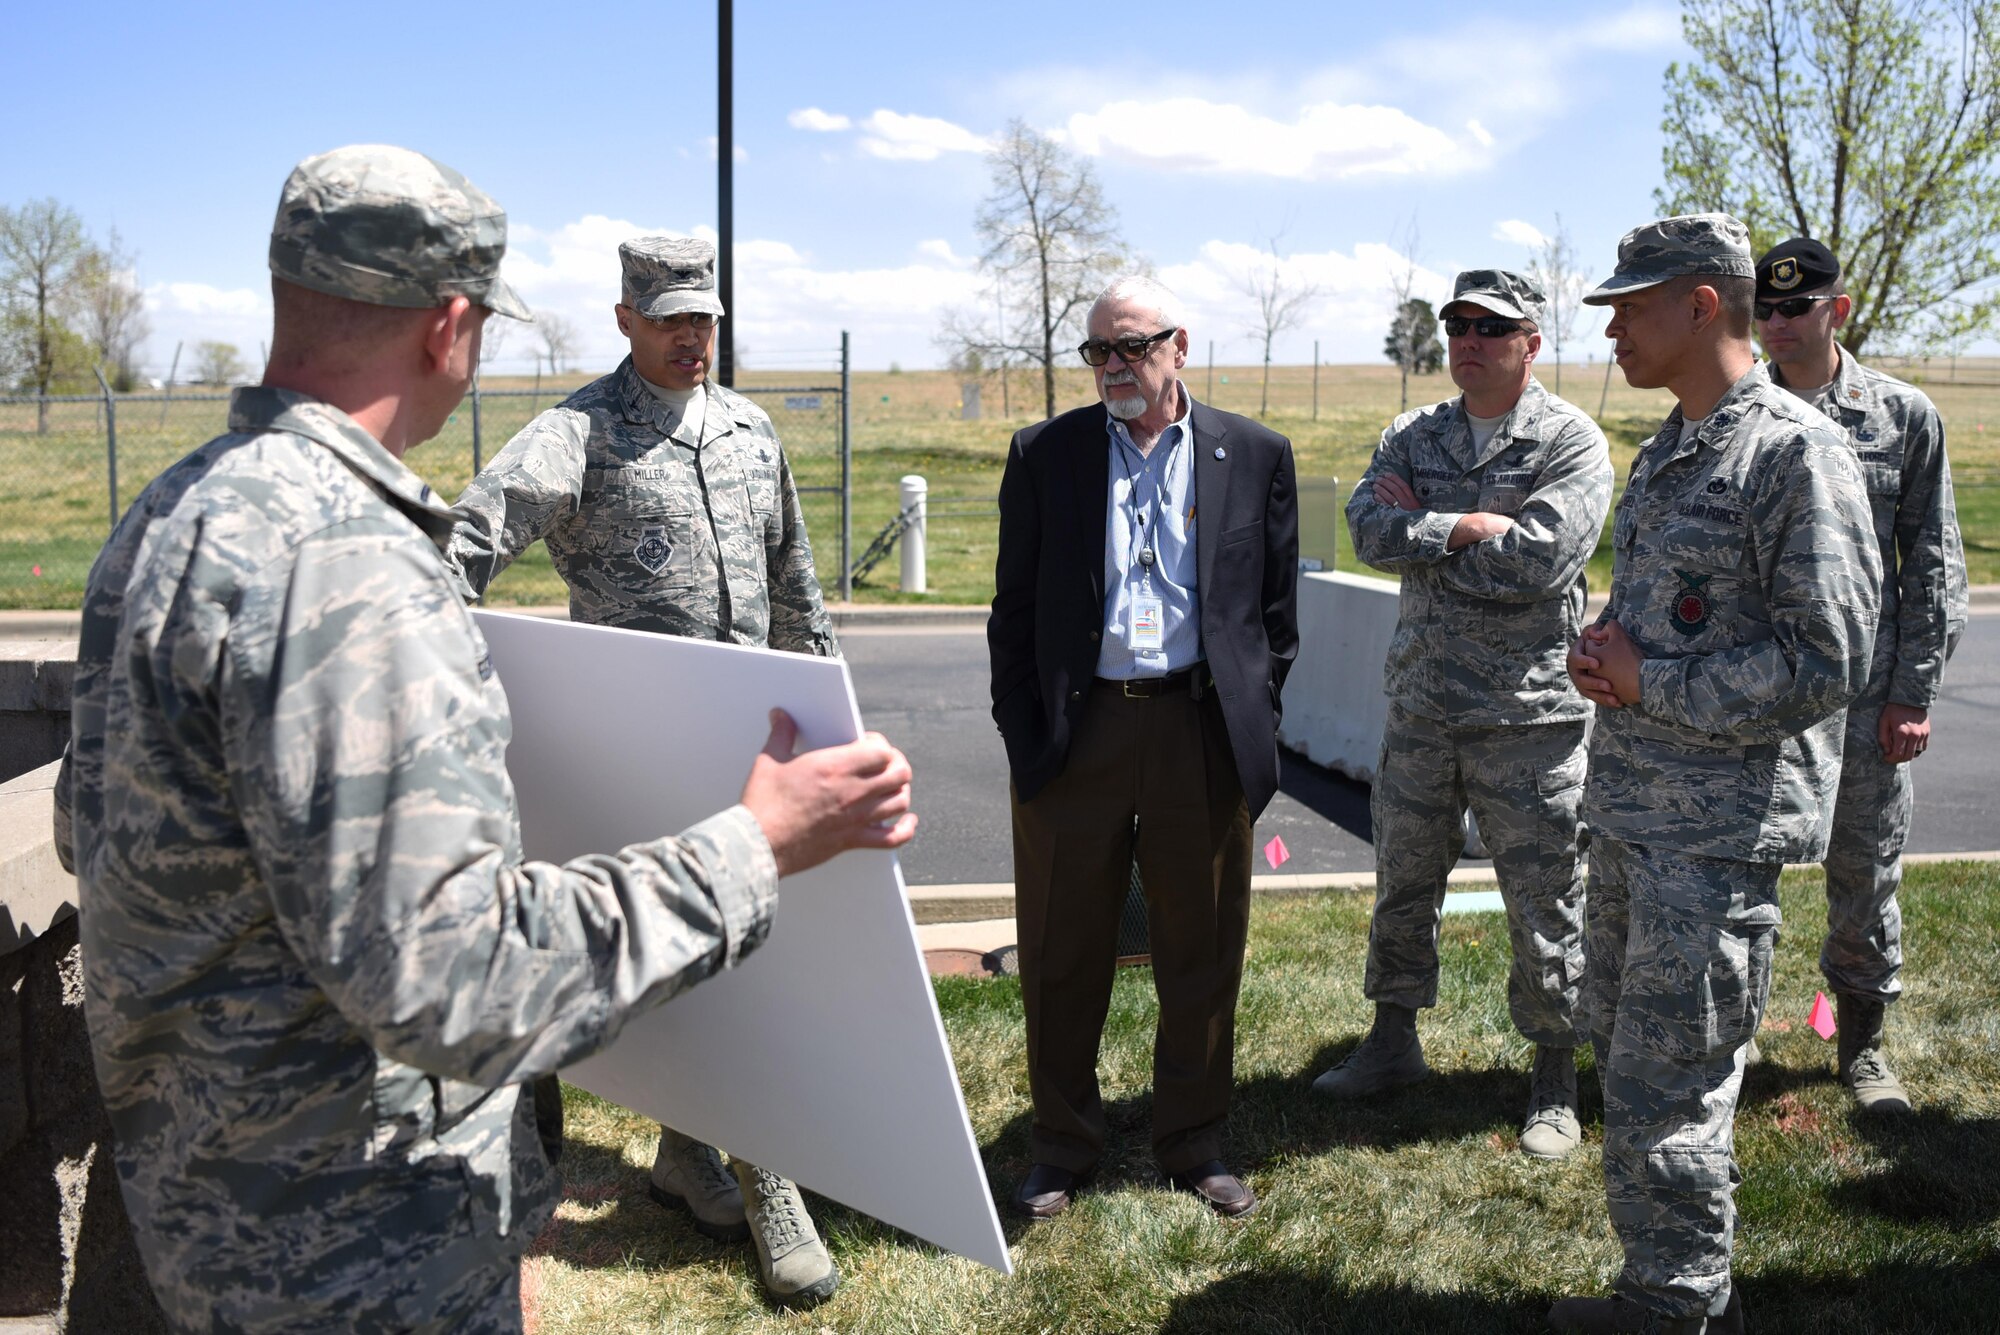 Team Buckley’s leadership team discusses future construction plans for the 6th Avenue Gate with George “Skip” Noe, Aurora city manager, April 19, 2017, on Buckley Air Force Base, Colo. When completed, the update to this gate will improve city traffic by redirecting commercial vehicles to a more accessible route. (U.S. Air Force photo by Airman First Class Holden S. Faul/ Released)